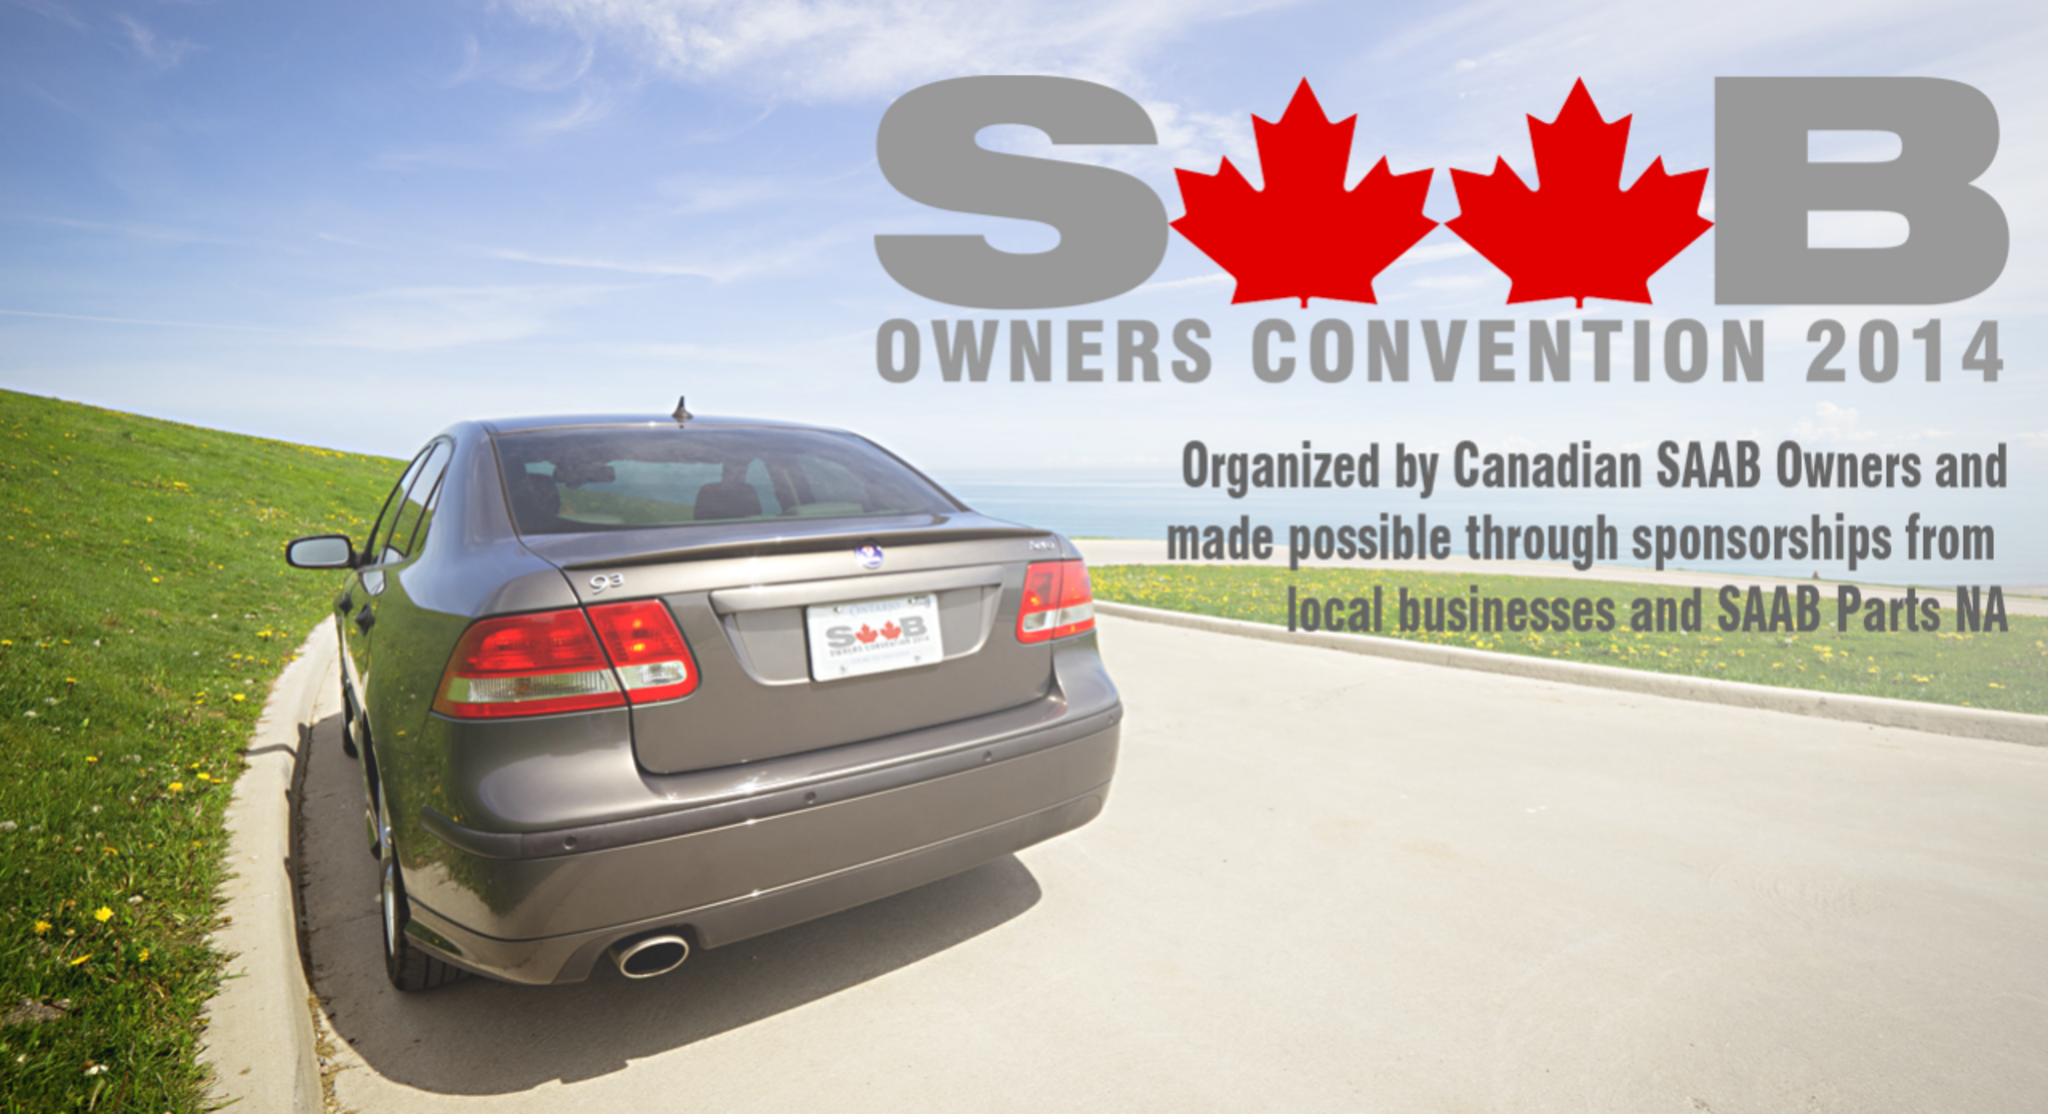 Canadian SAAB Owners Convention